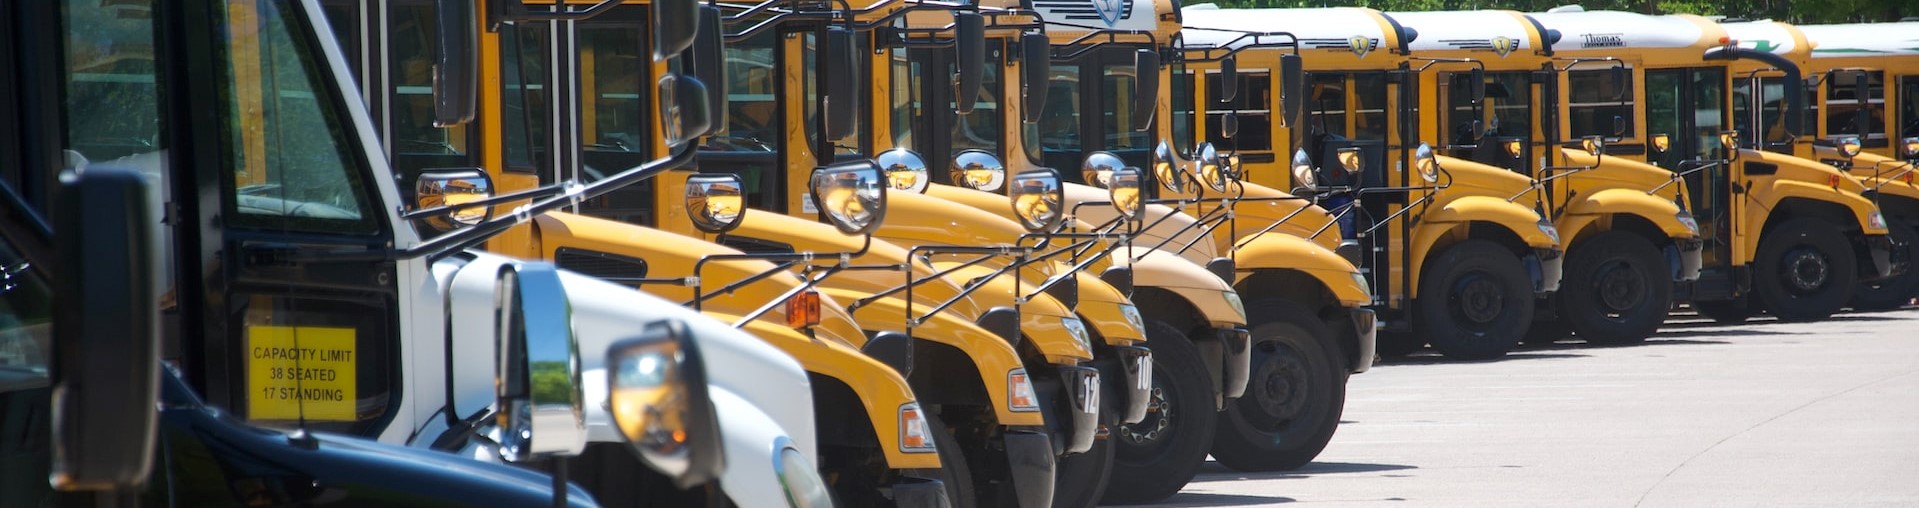 School buses parked | Breast Cancer Car Donations